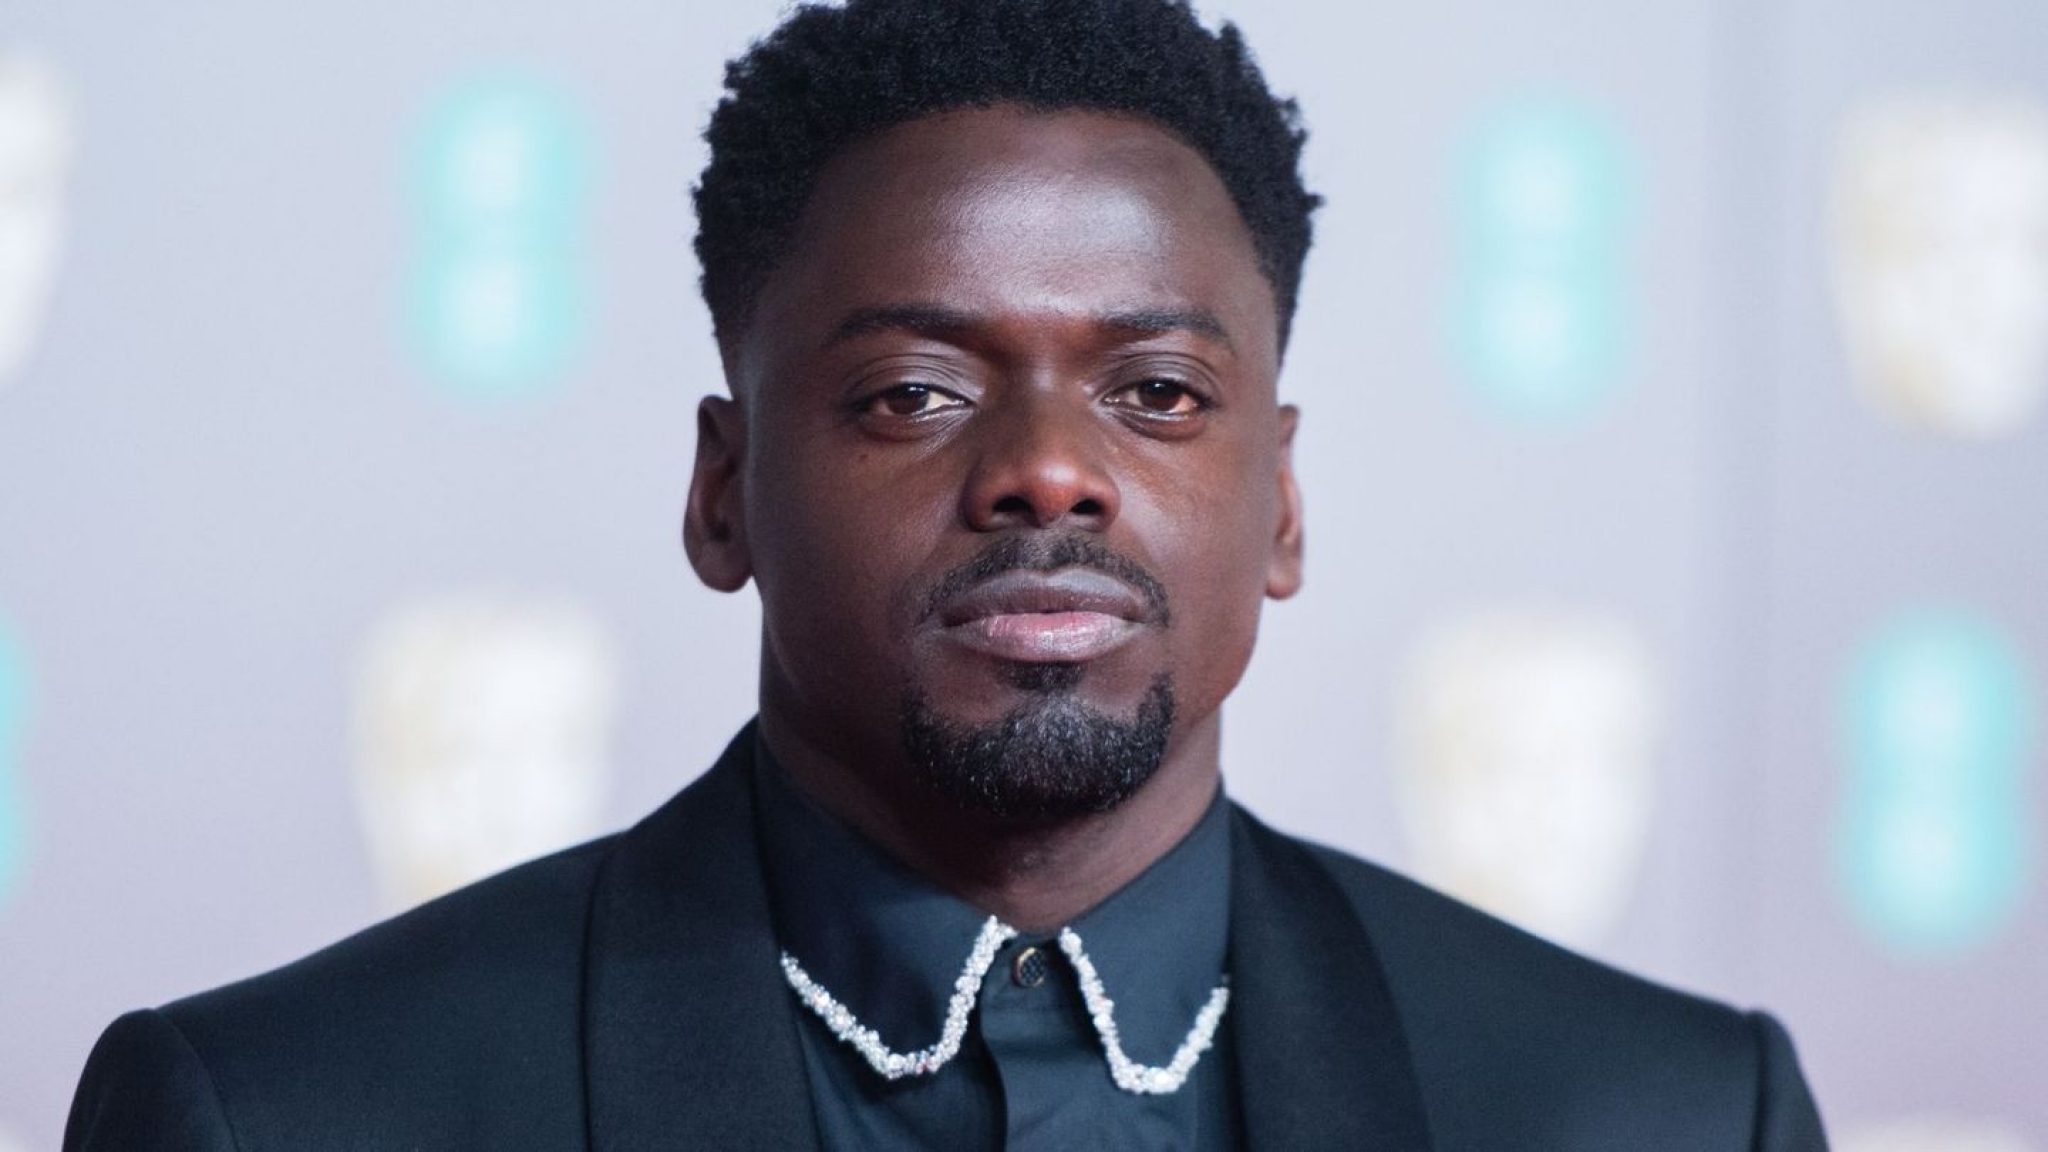 Daniel Kaluuya Tributes Black Panthers In Oscars Speech: ‘They Showed Me How To Love Myself’